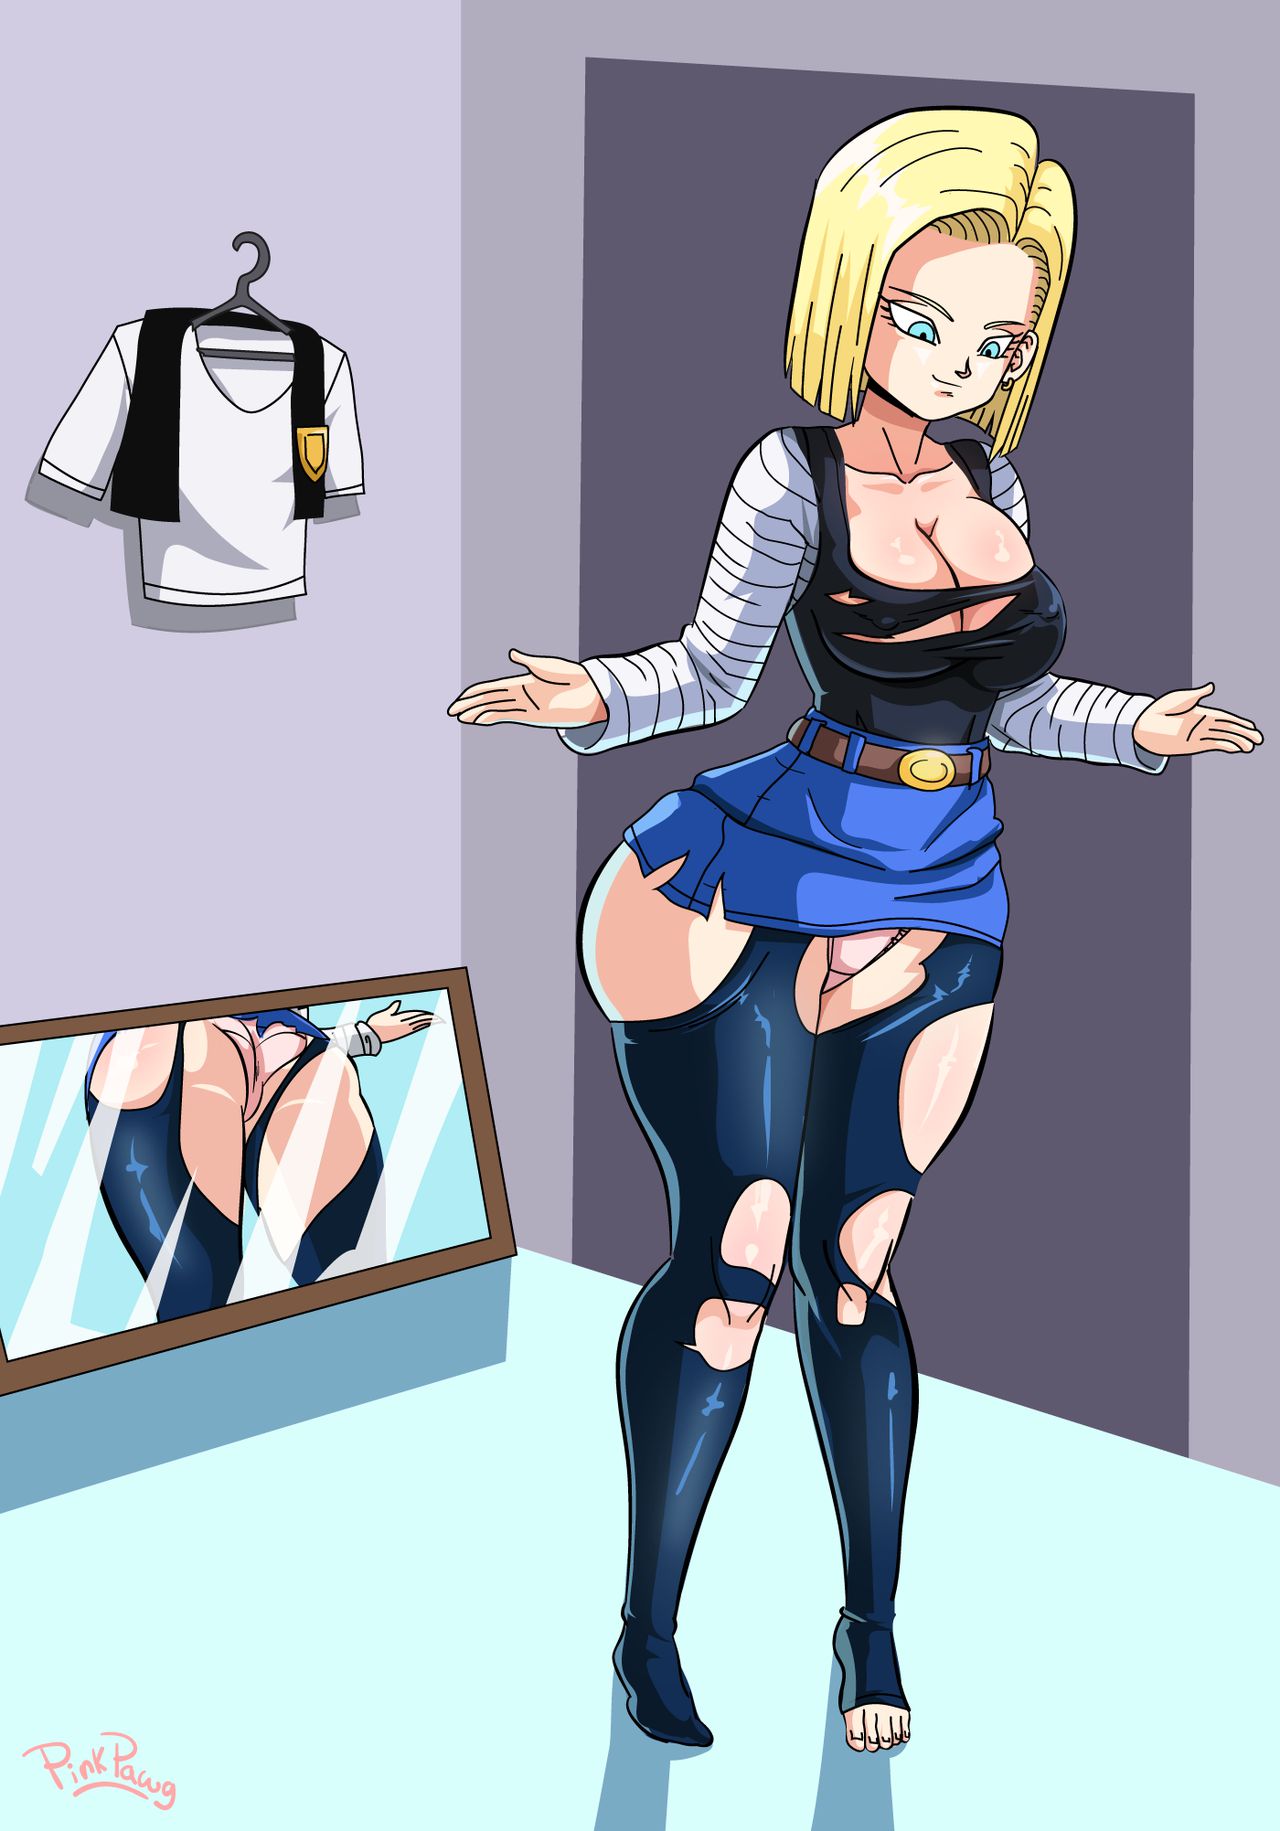 [Pink Pawg] Android 18 meets Krillin (Dragon Ball Z) [Ongoing] 1